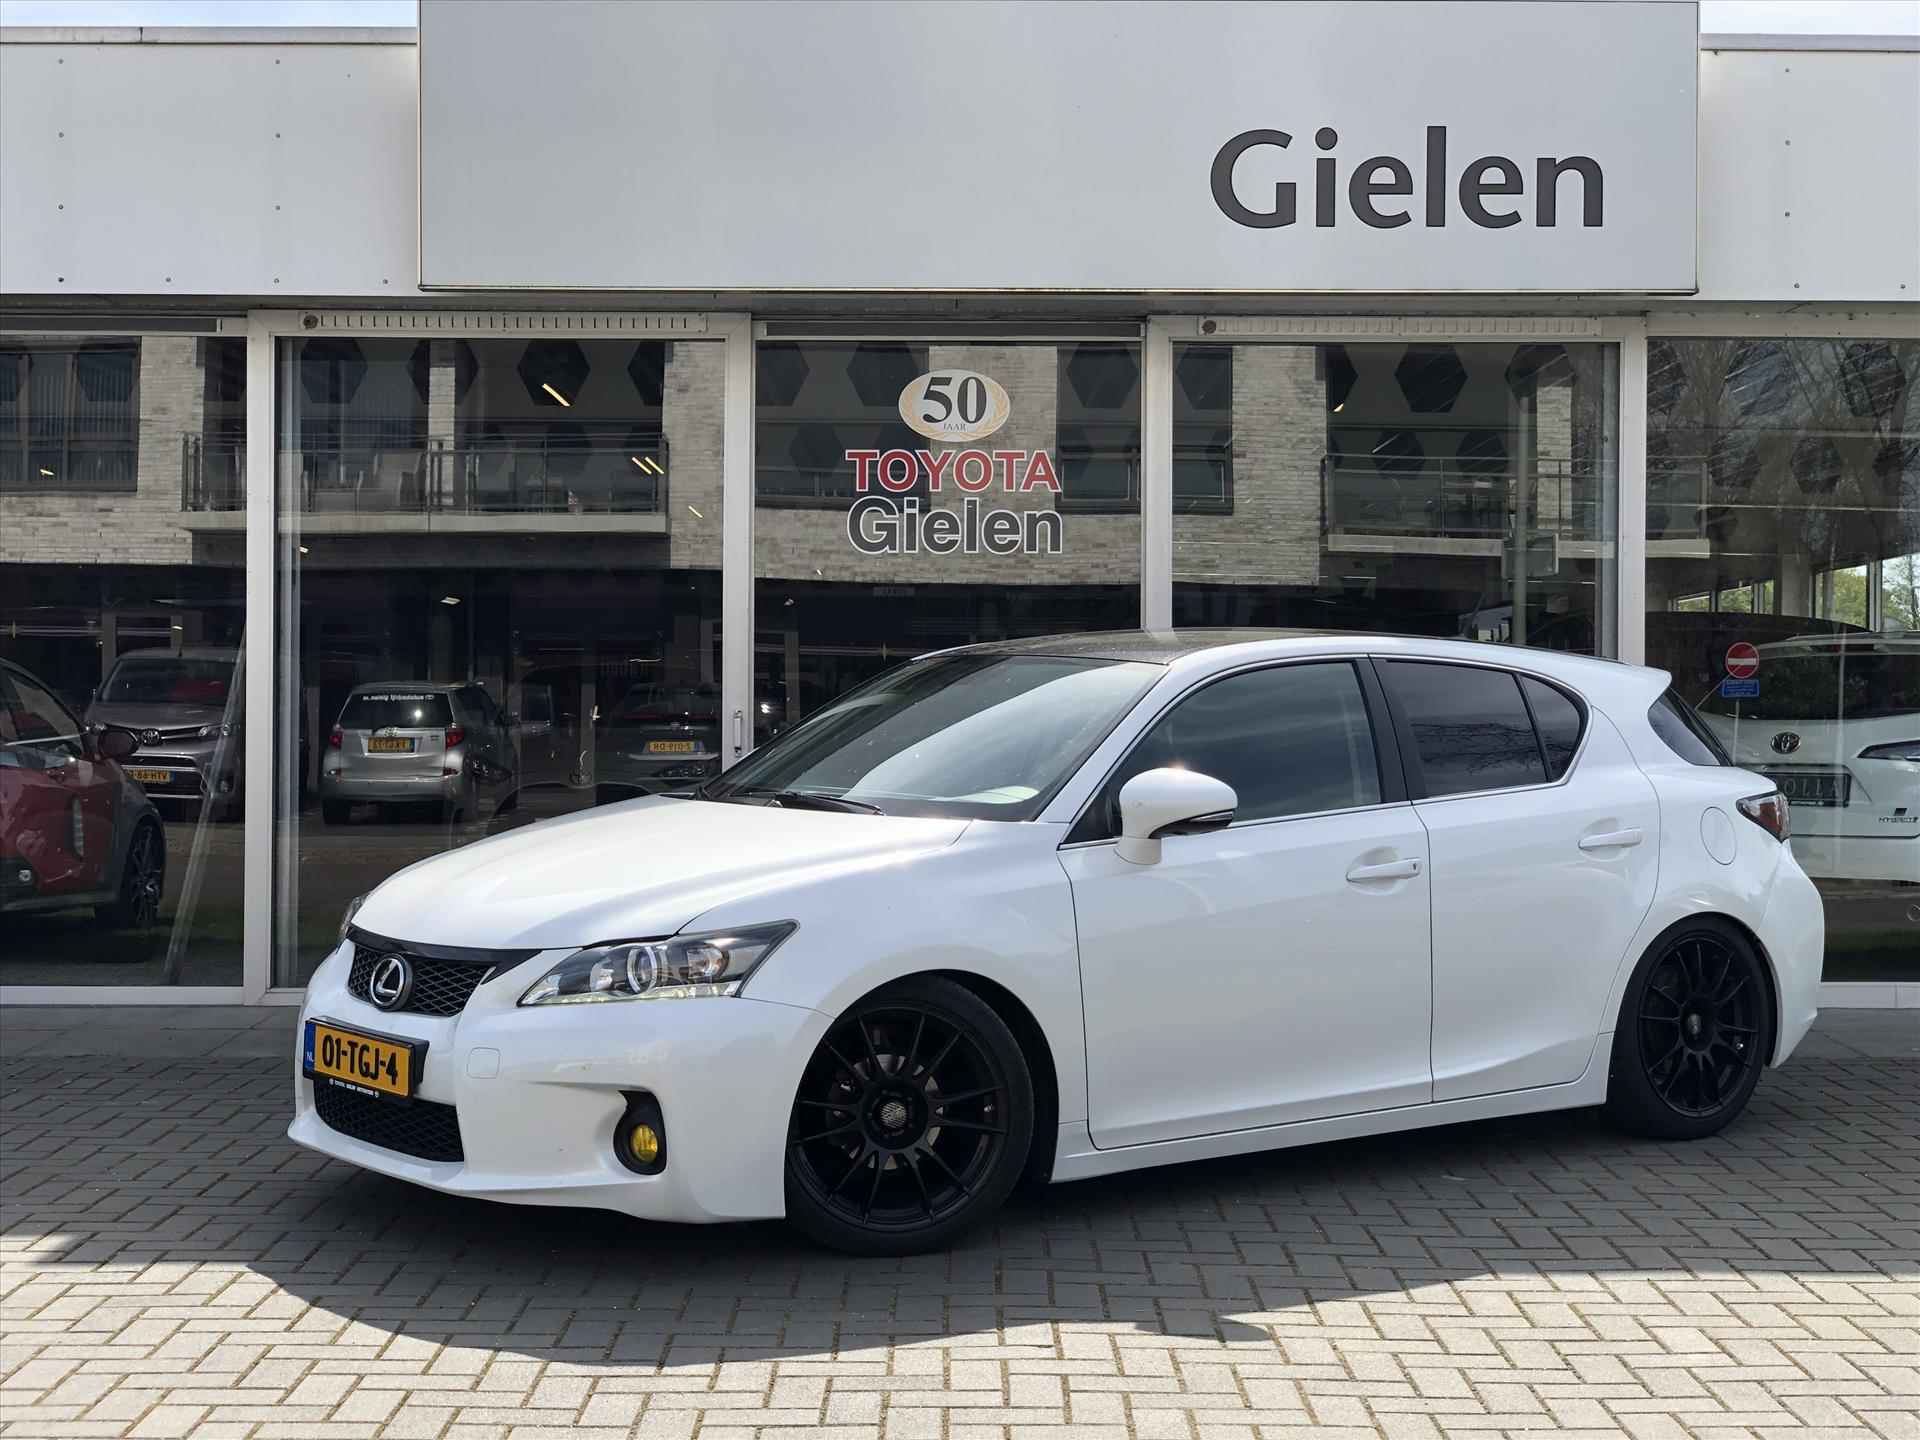 Lexus Ct 200h Business Line Pro F Sport Grill | Parkeercamera, Keyless, Cruise control, 18 inch, Privacy Glass, Zeer compleet! - 1/39